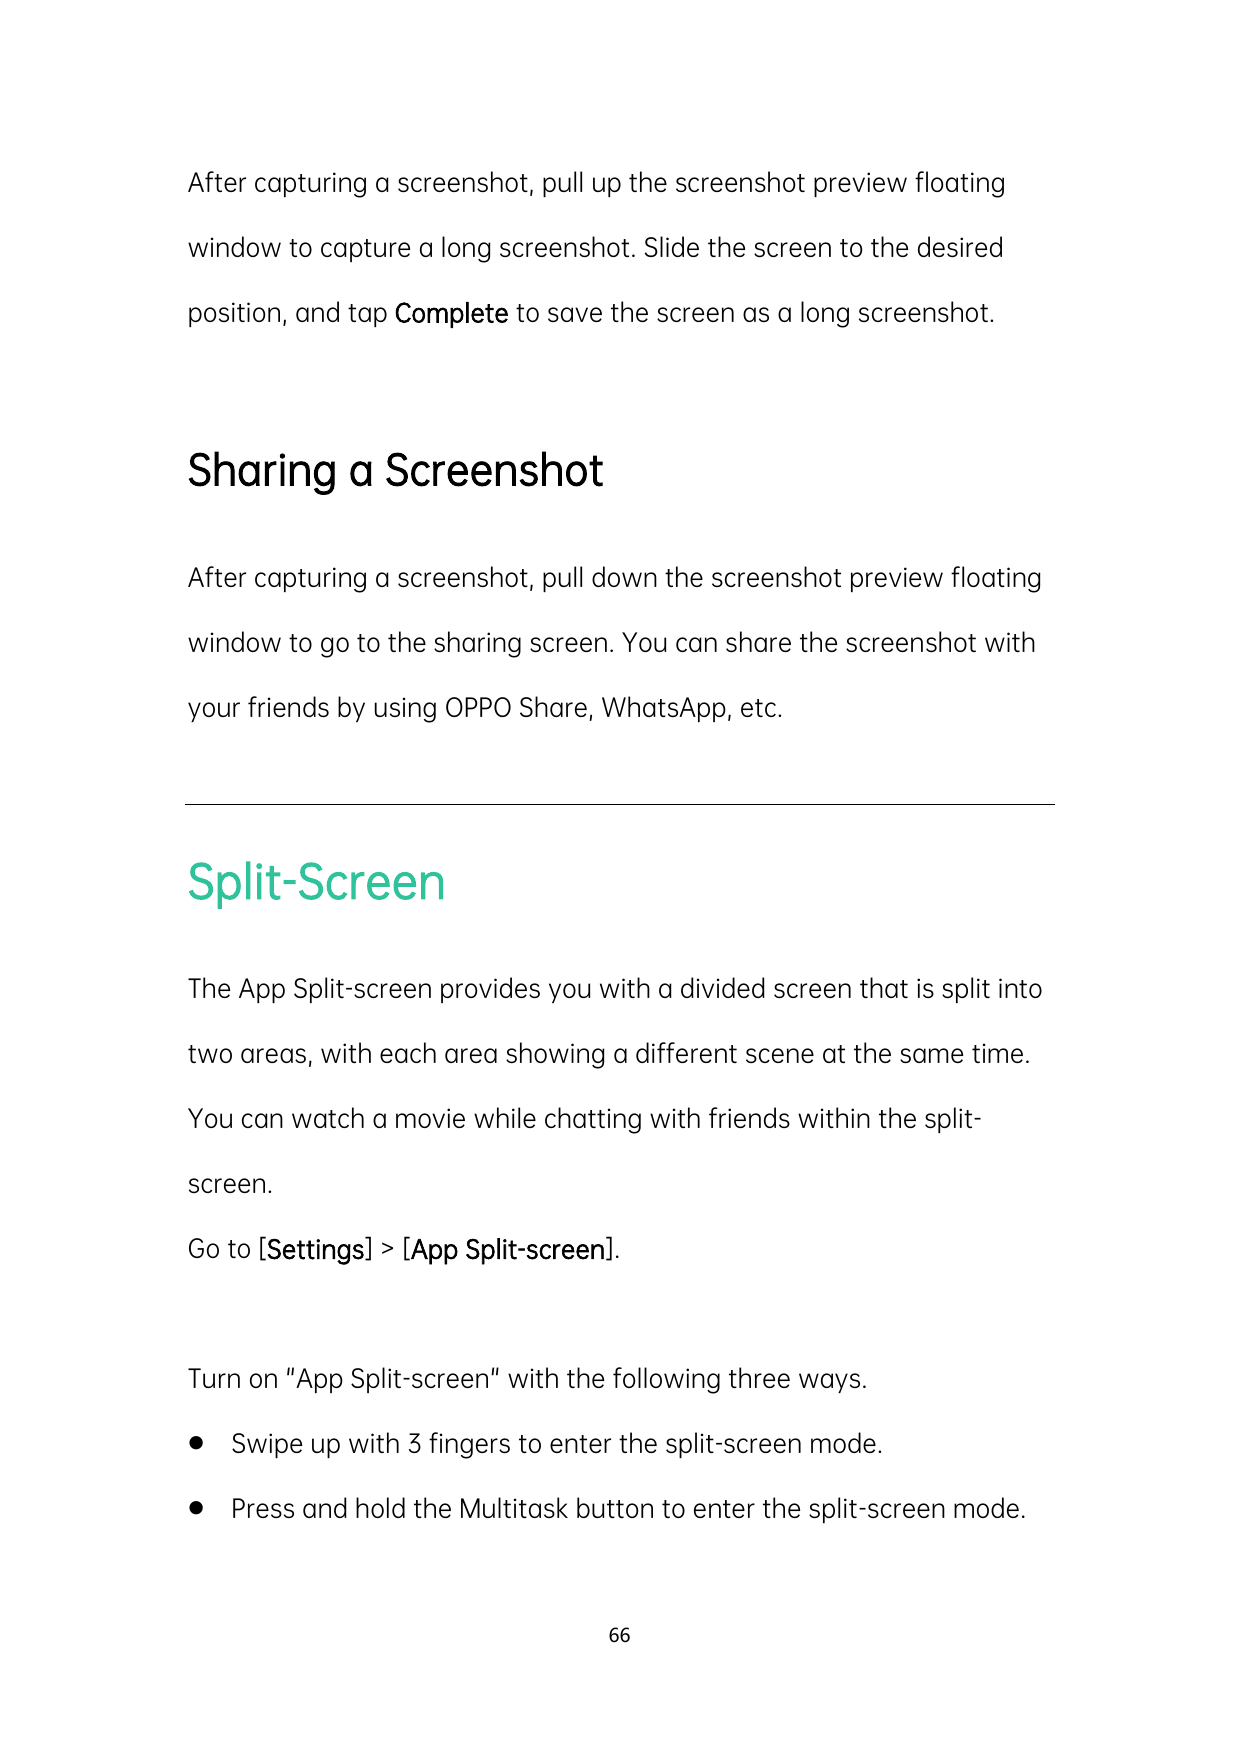 After capturing a screenshot, pull up the screenshot preview floatingwindow to capture a long screenshot. Slide the screen to th